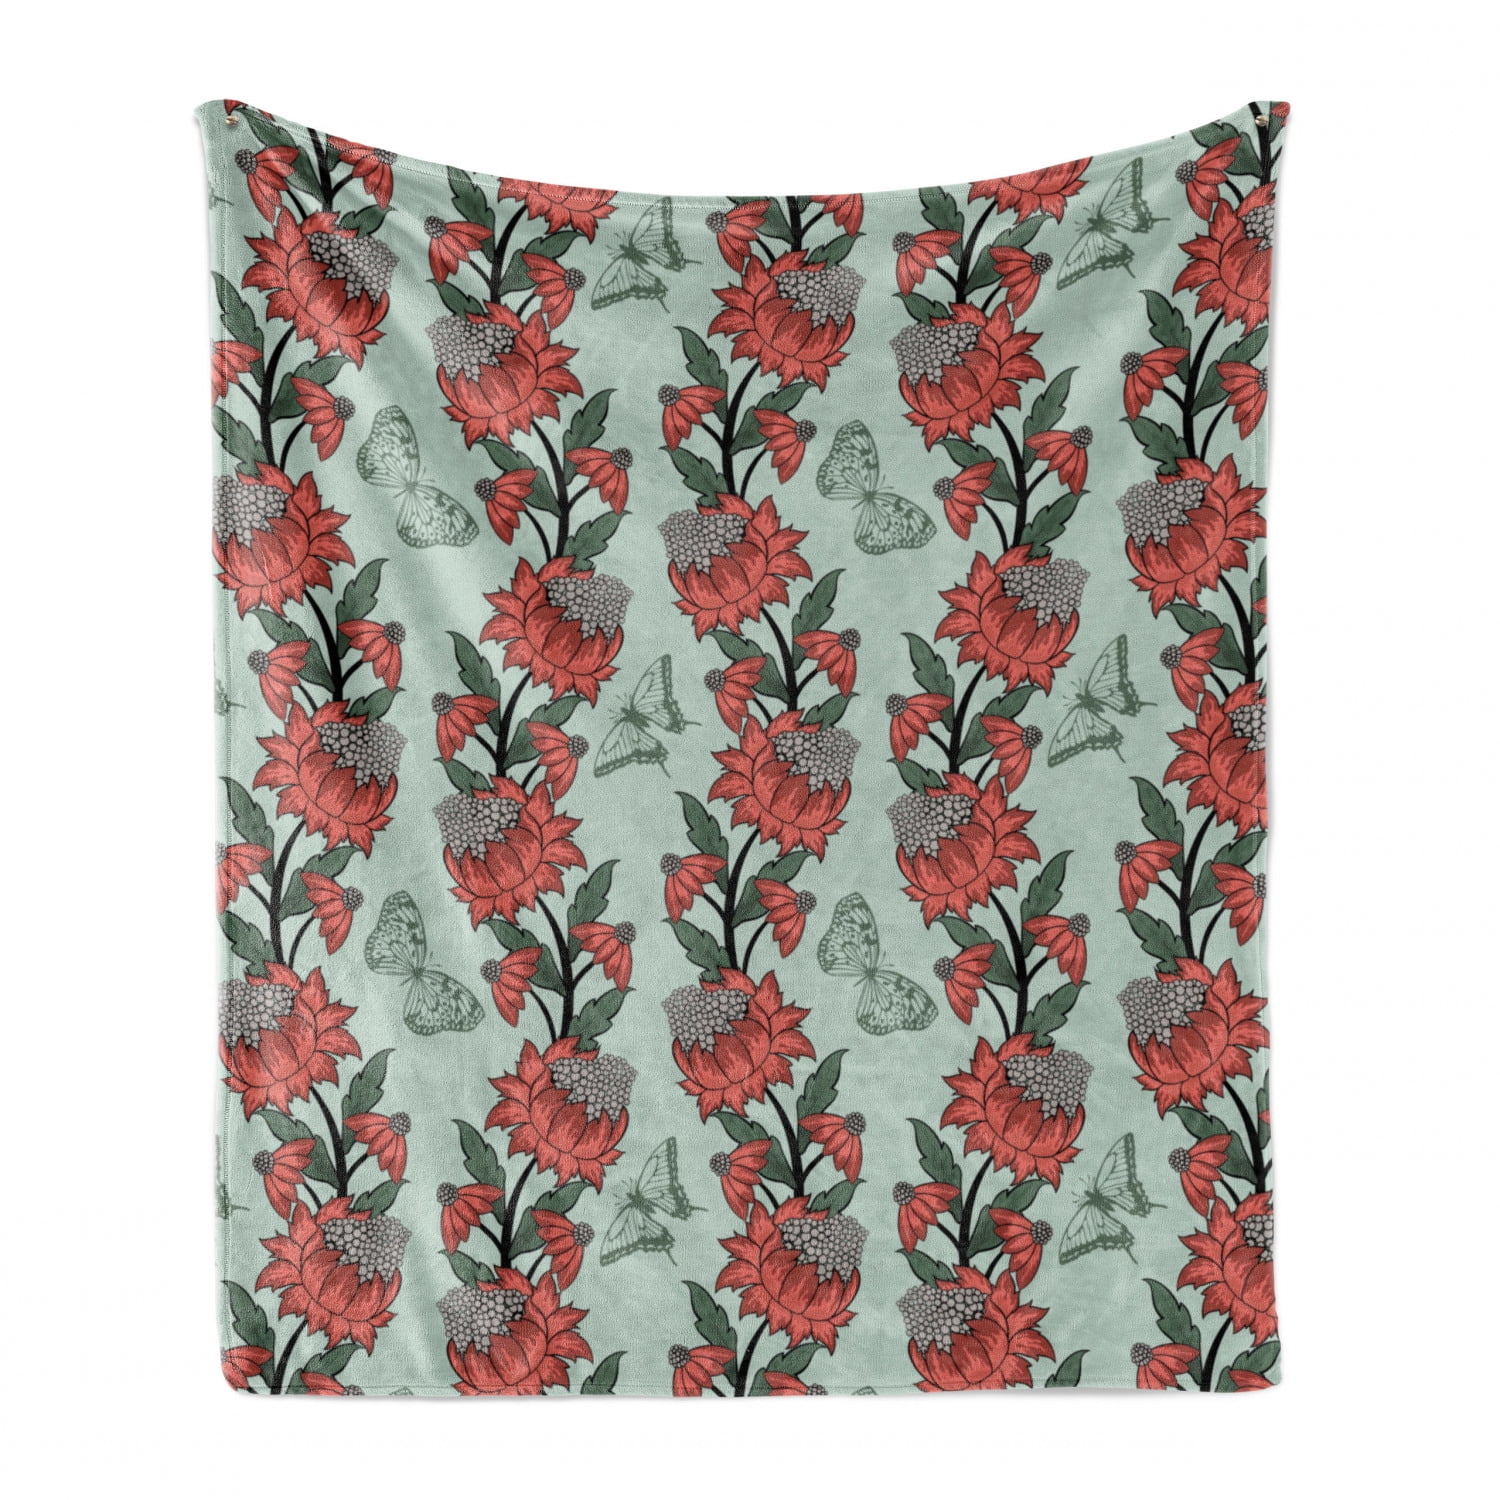 70 x 90 Vintage Tropic Jungle Foliage with Colorful Flowers and Exotic Leaves Ambesonne Hibiscus Soft Flannel Fleece Throw Blanket Cozy Plush for Indoor and Outdoor Use Dark Brown Multicolor 